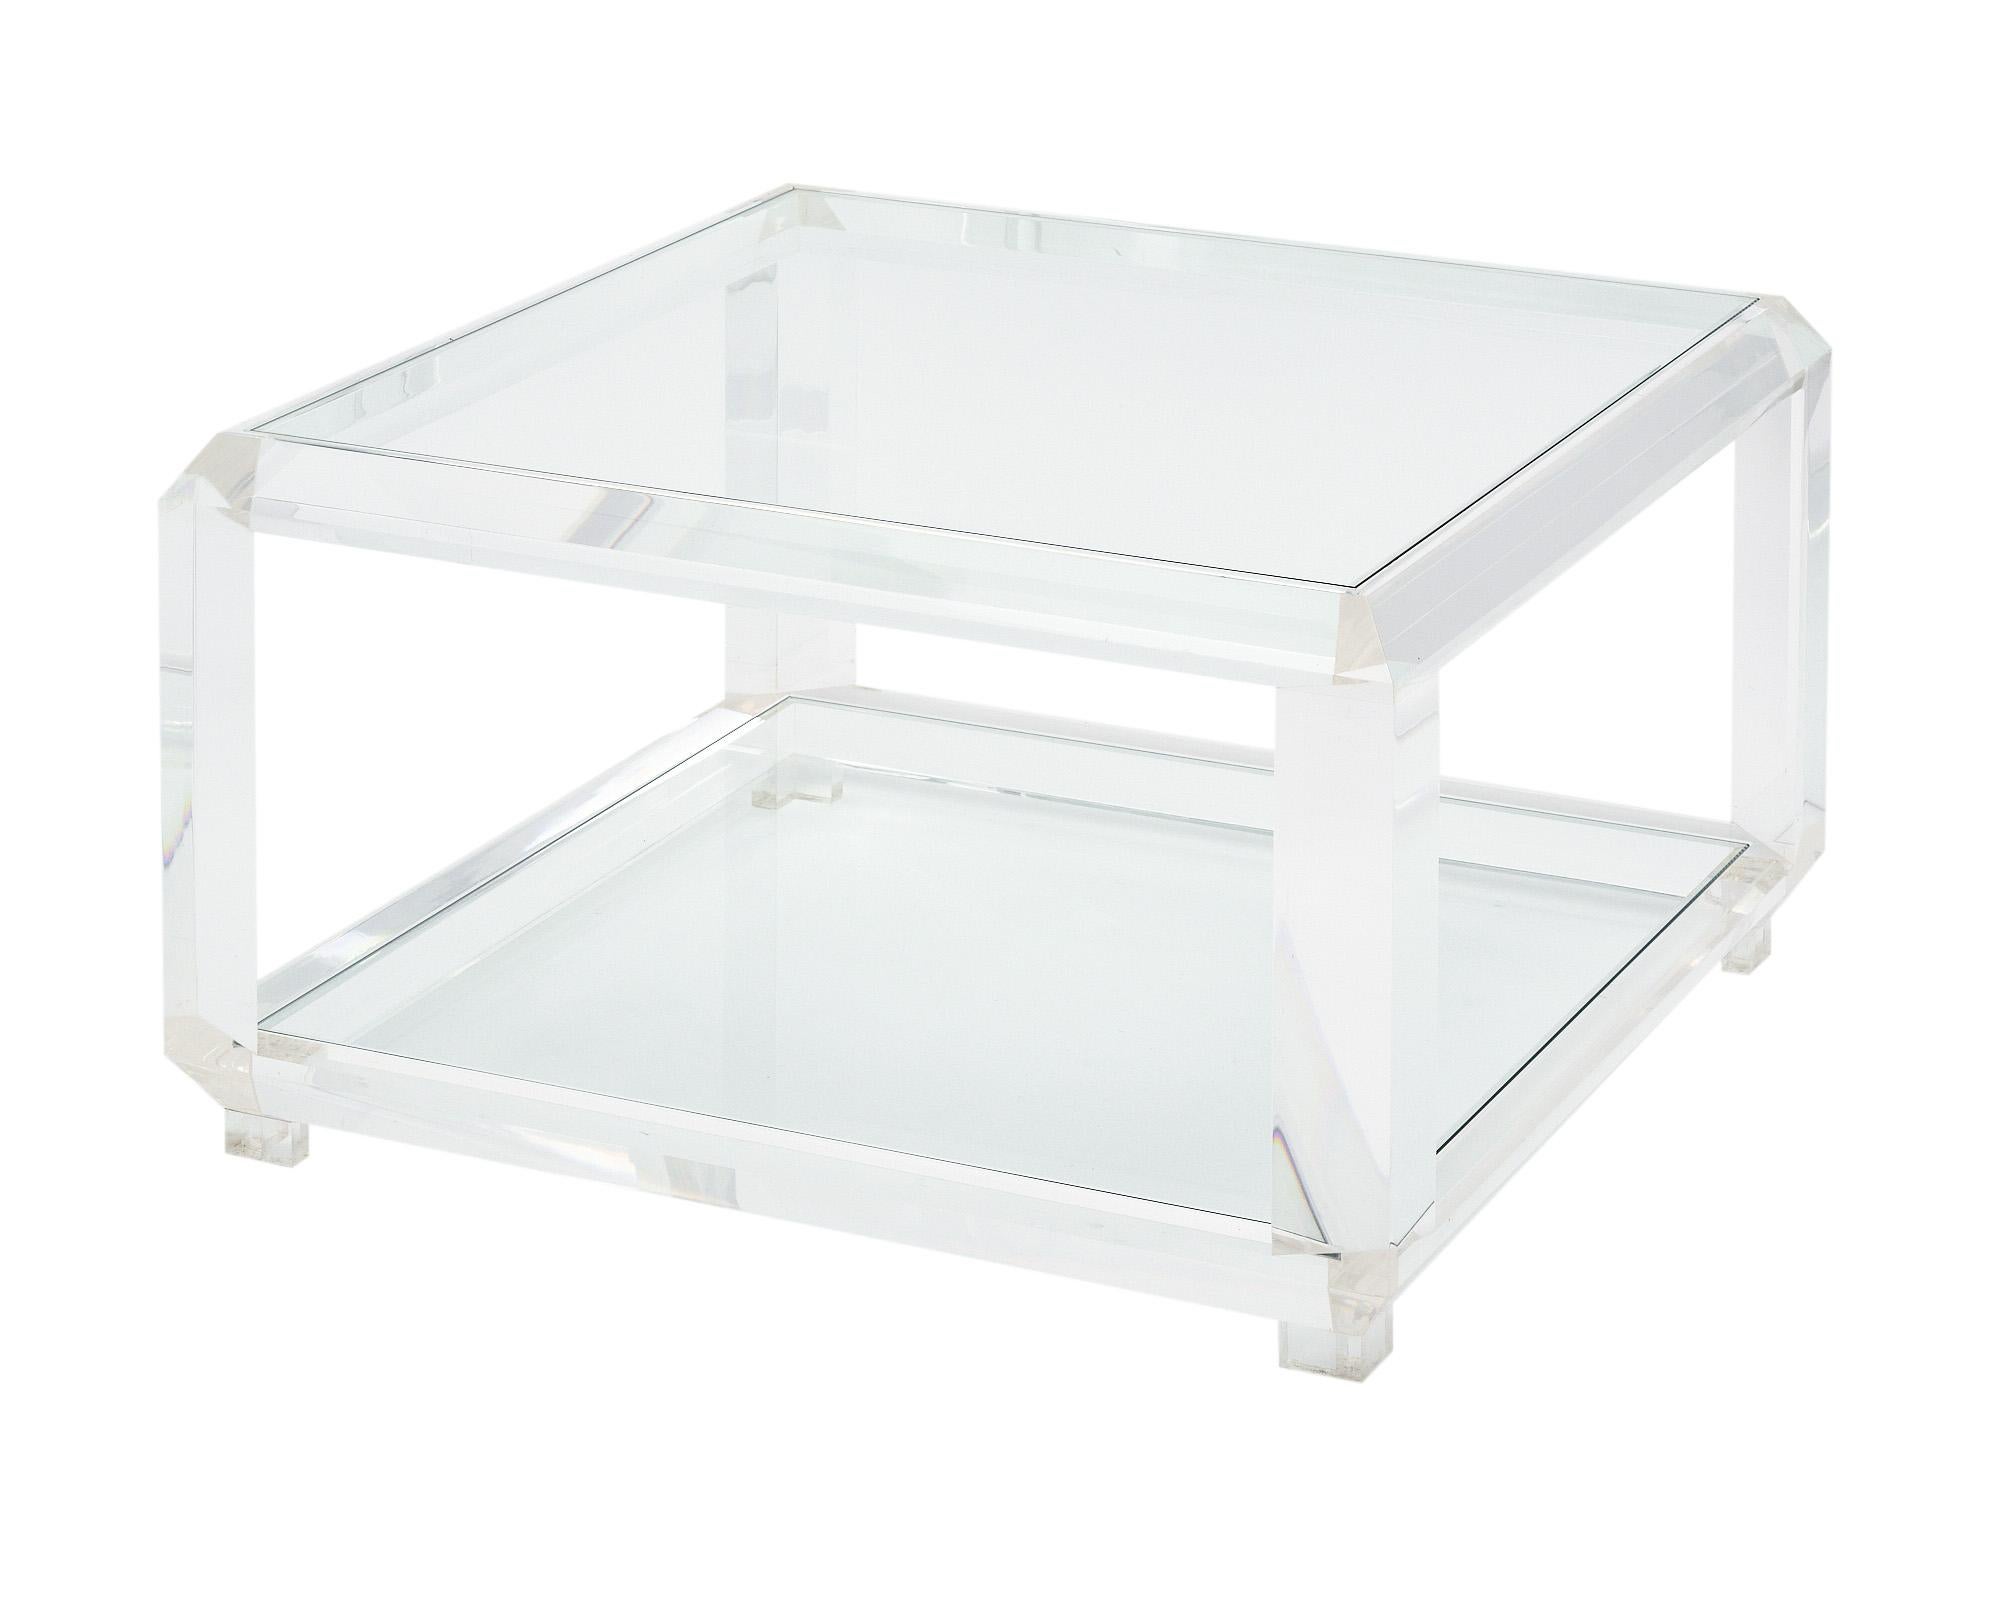 Pair of coffee tables from France made with thick Lucite structures and glass tops. Each table also features a lower glass shelf for functionality. They are each signed by designer Marc Micoud, known for working with Lucite.
